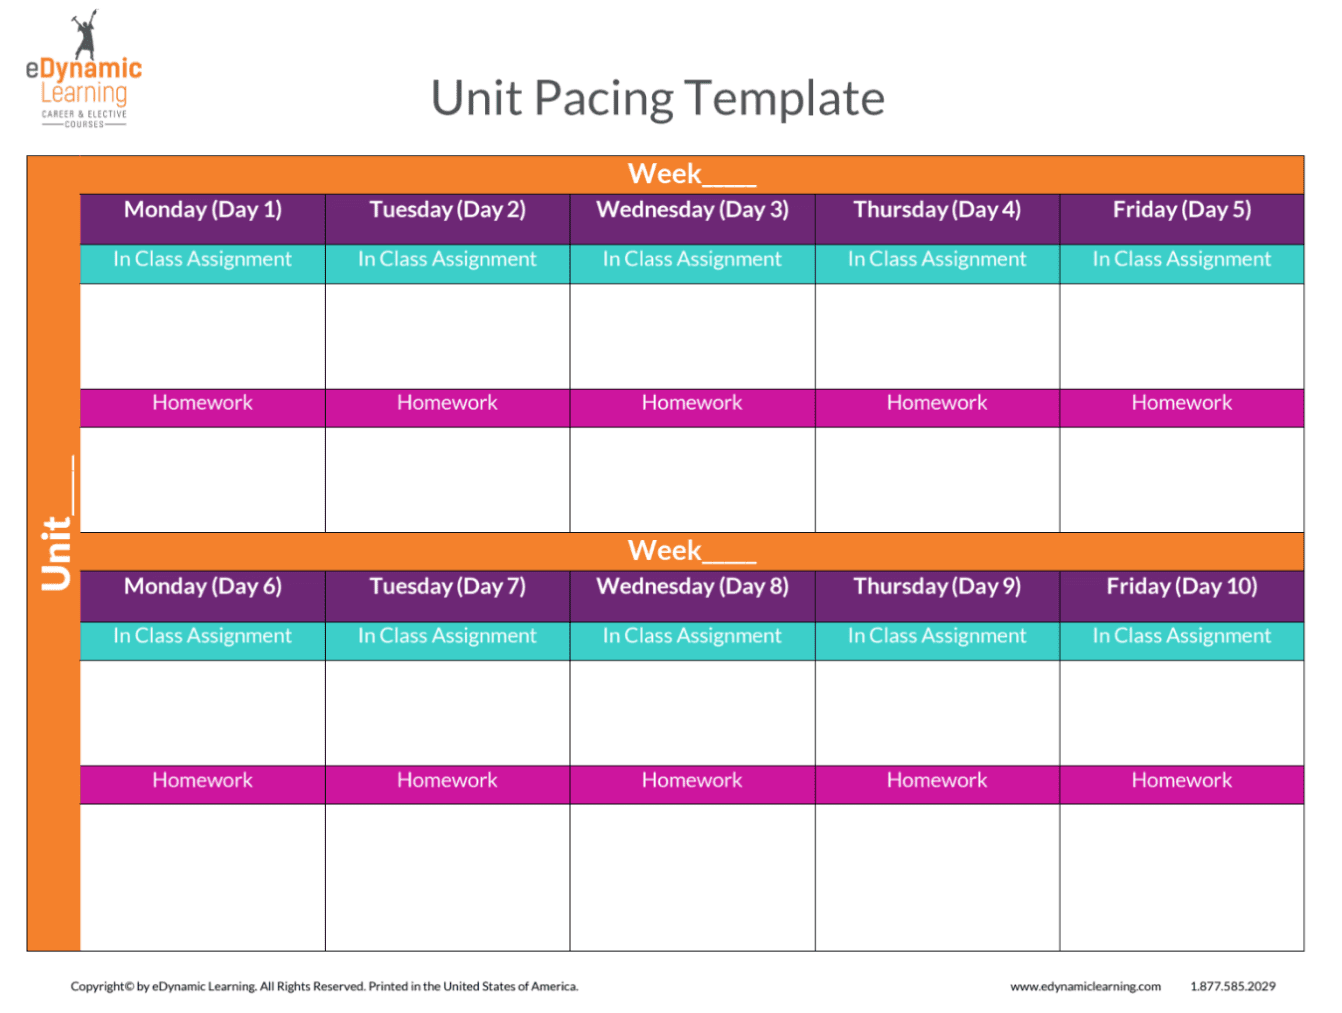 Unit Pacing Template